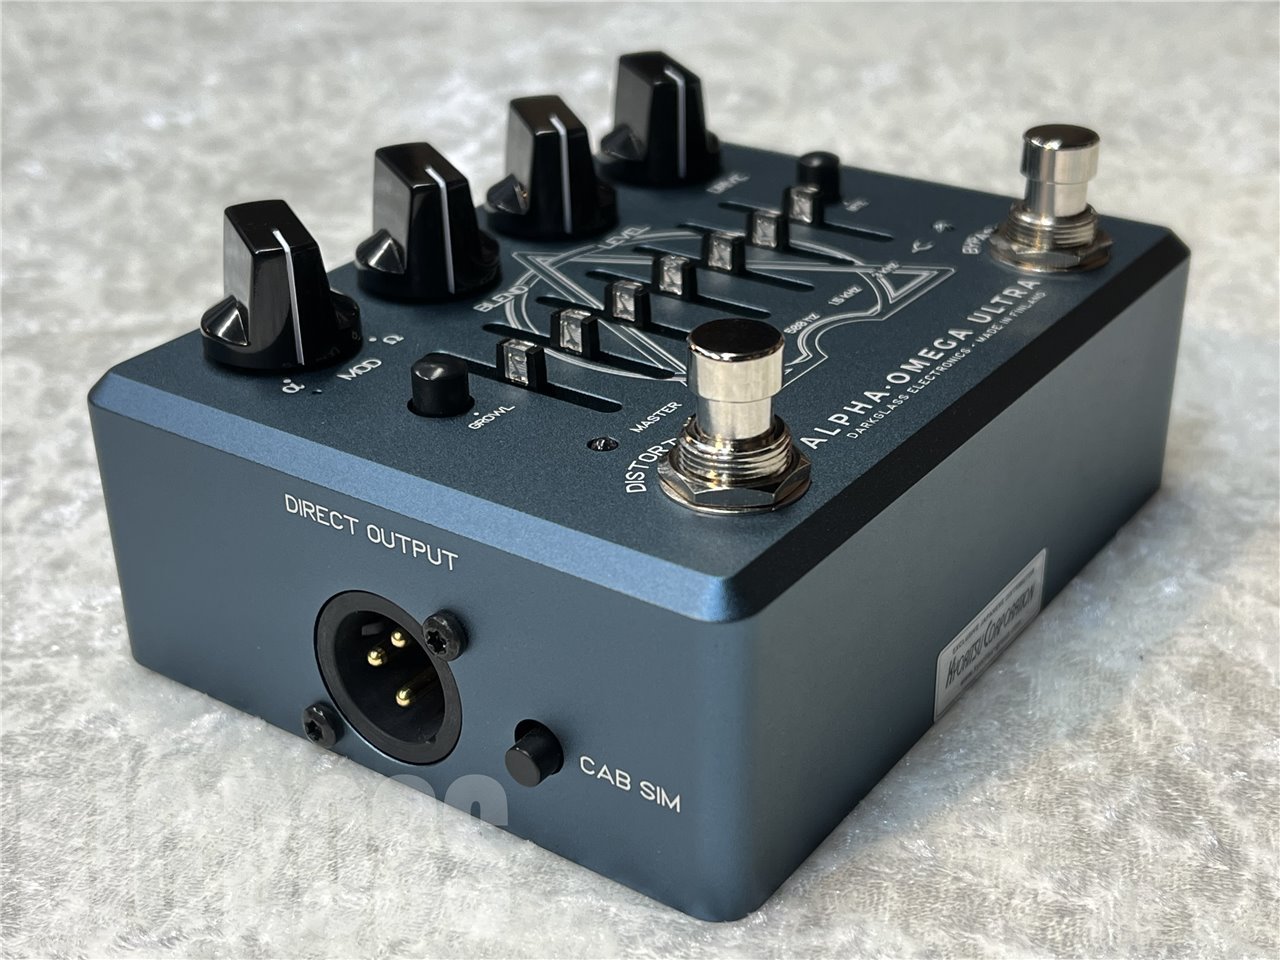 Darkglass Electronics ALPHA·OMEGA ULTRA V2 with AUX-IN（新品/送料 ...